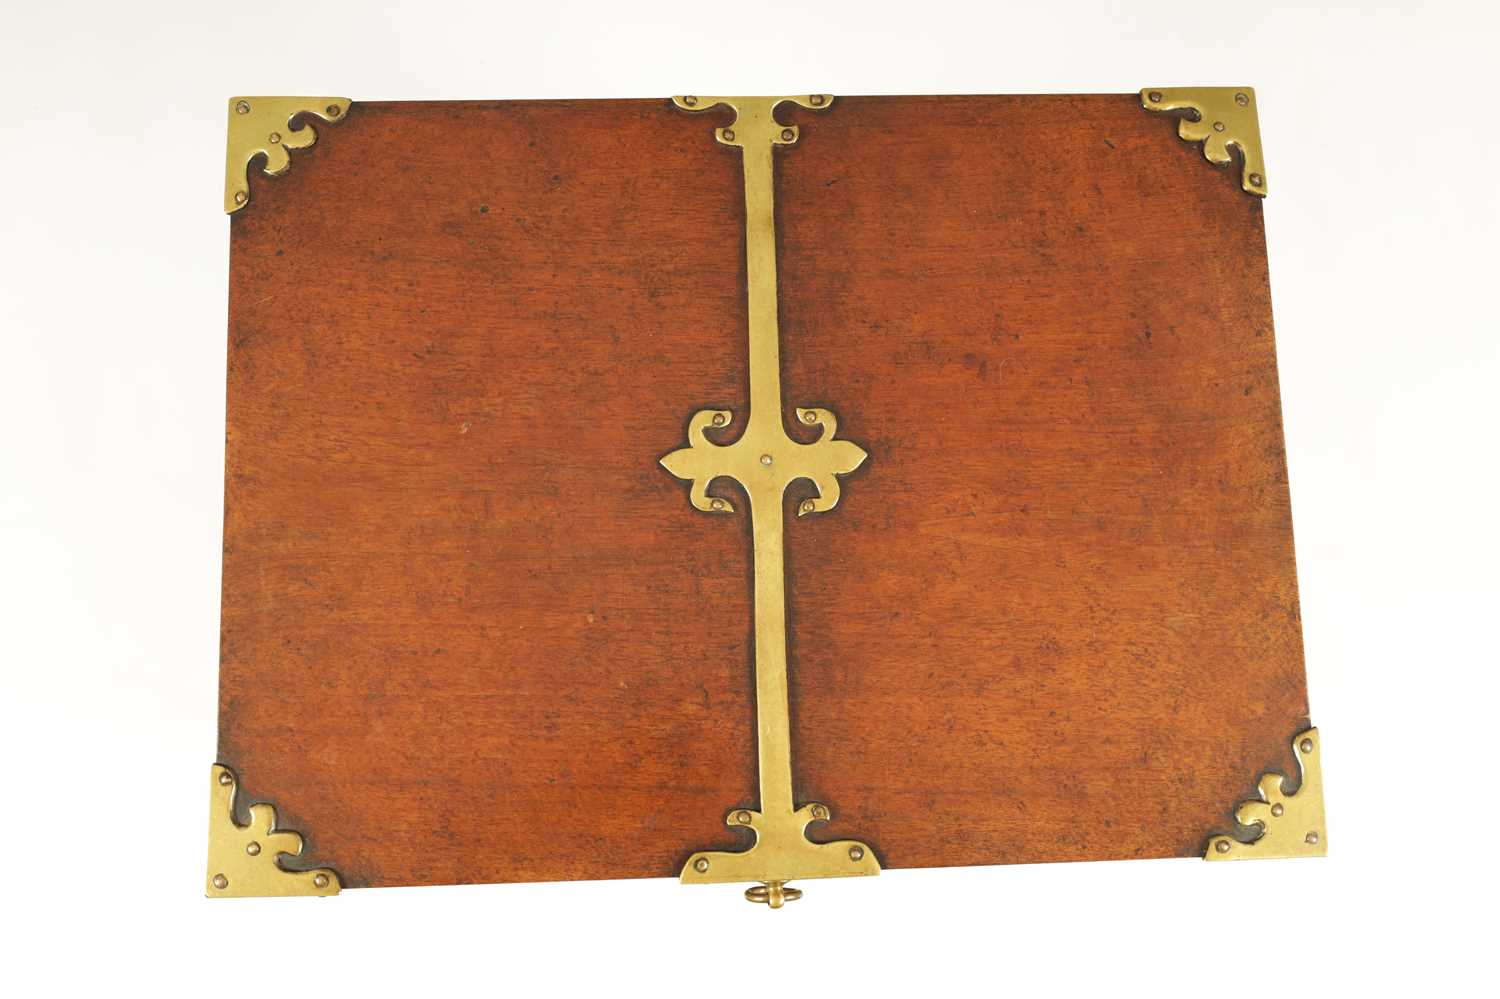 A RARE GEORGE III MAHOGANY PORTABLE CAMPAIGN BOX ON FOLDING LEGS WITH BRASS MOUNTS - Image 3 of 13